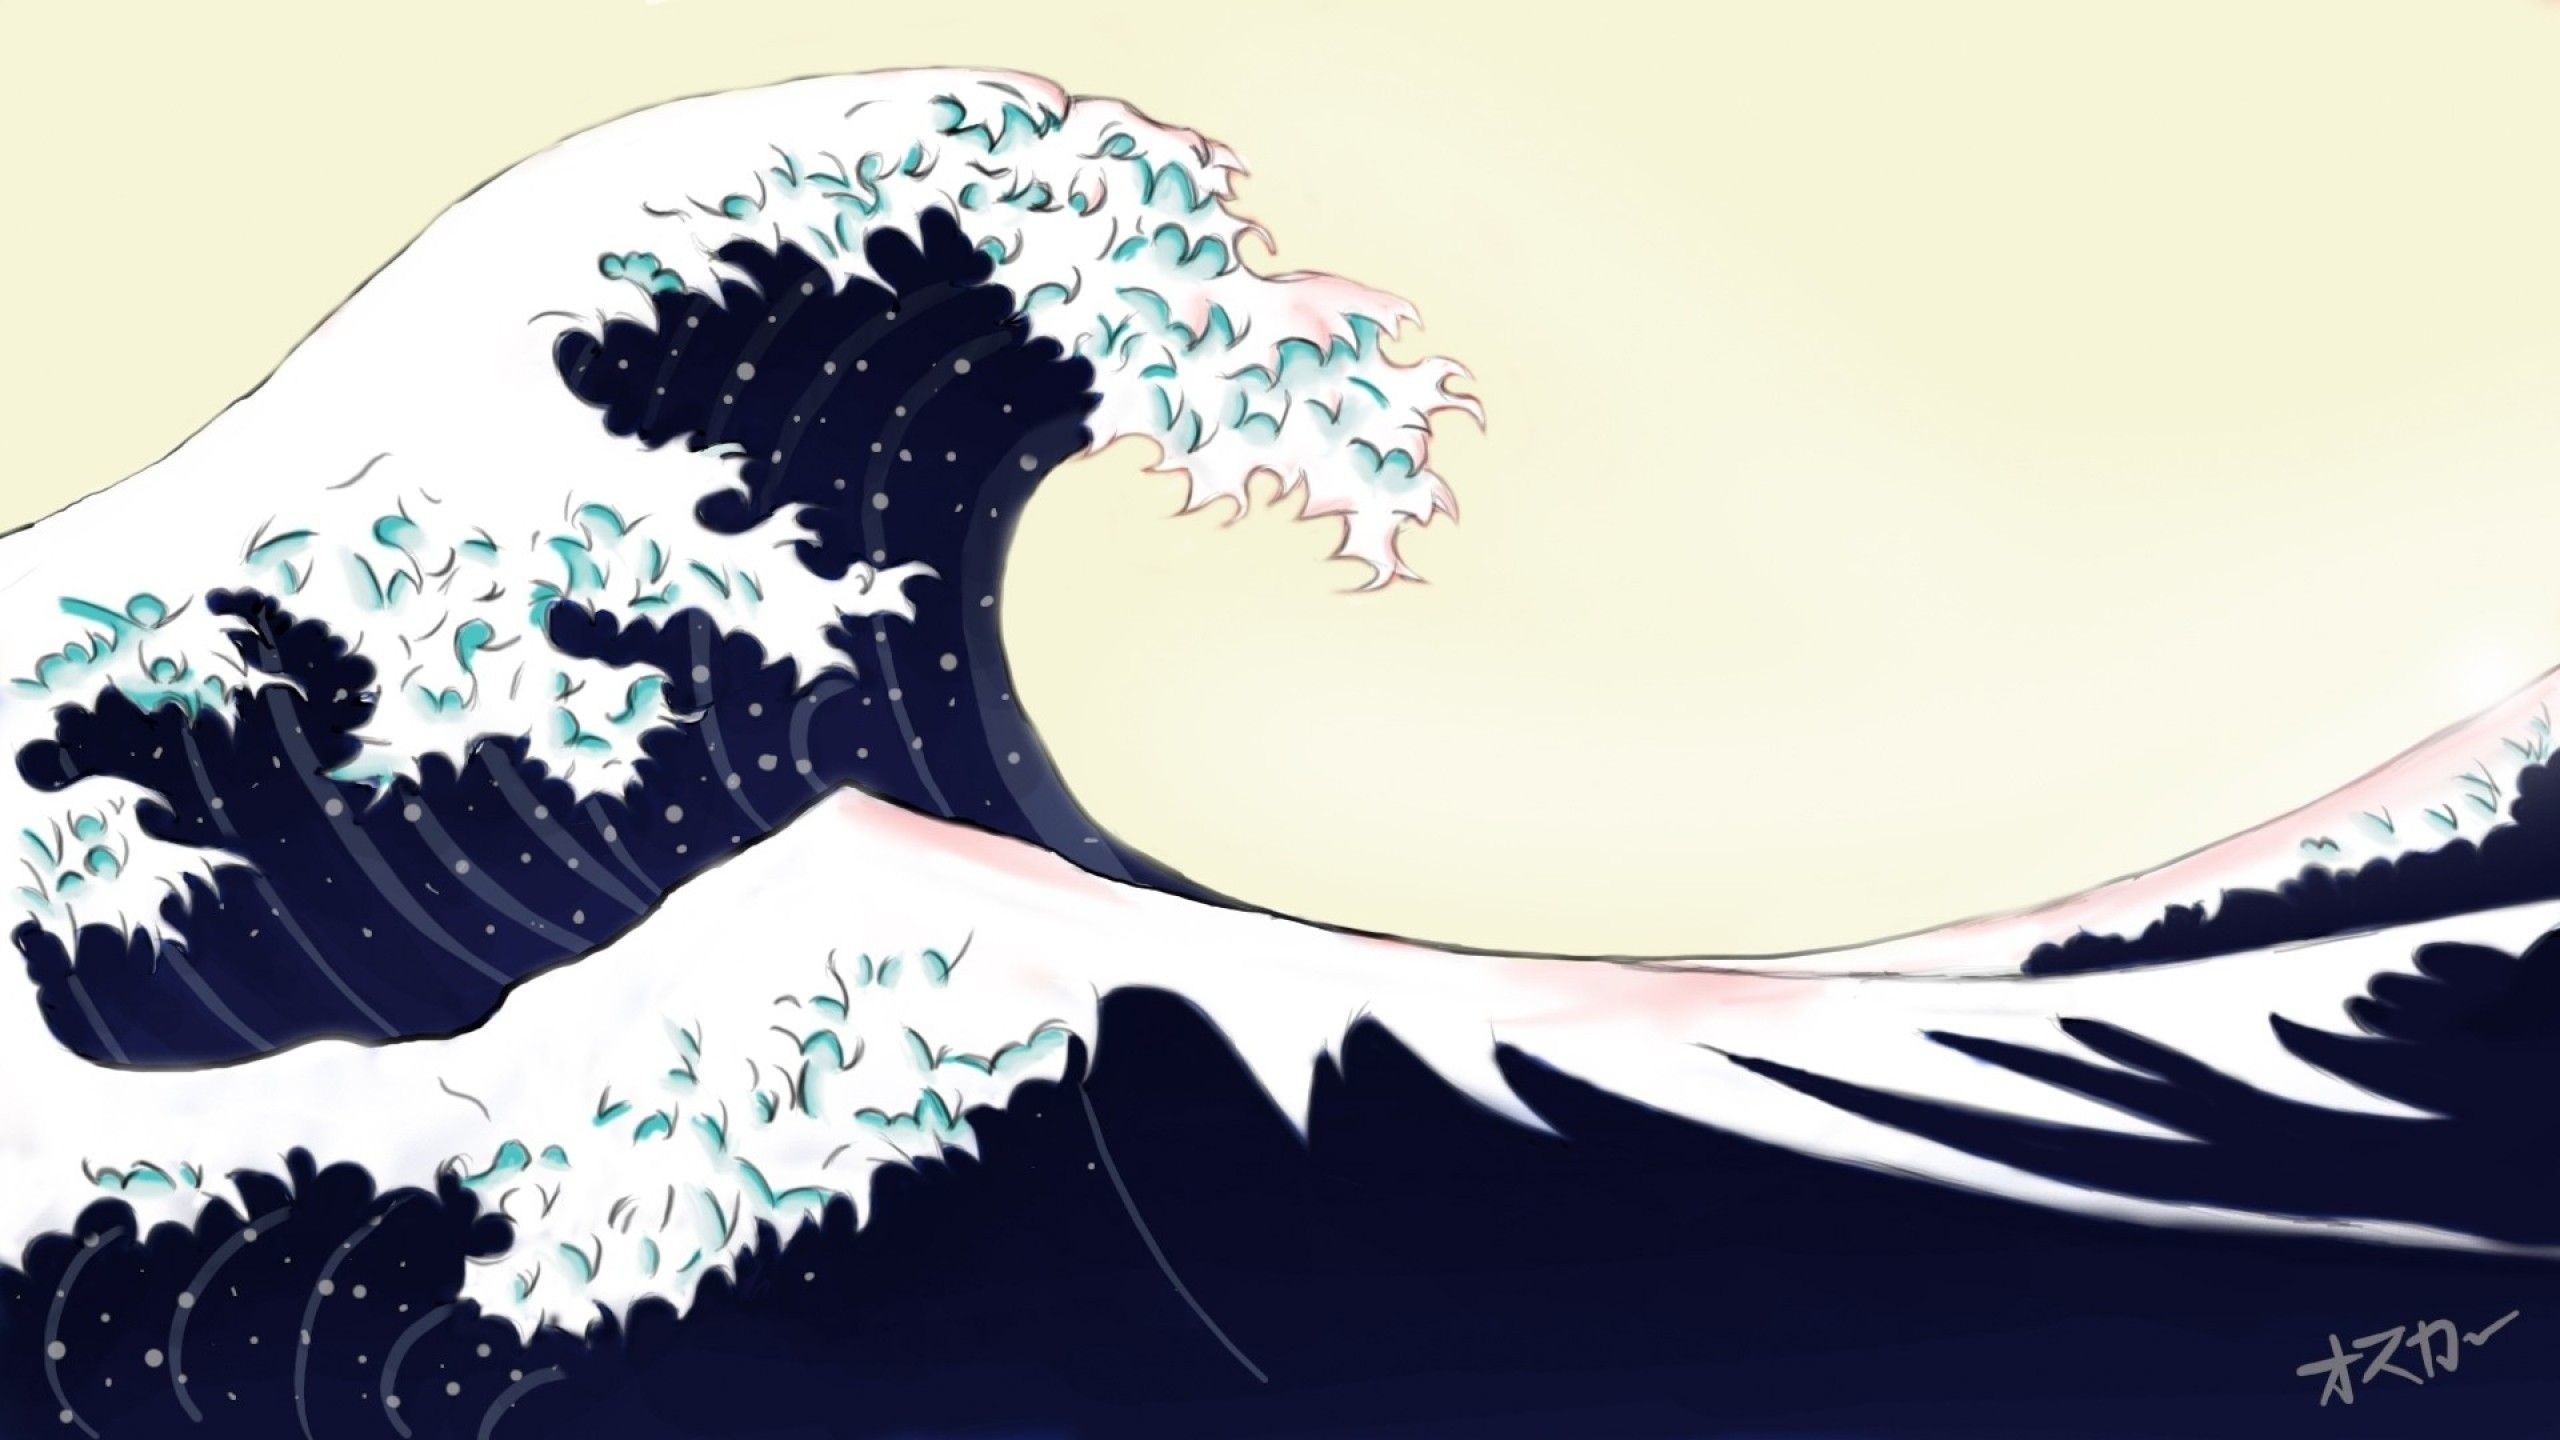 2560x1440  The Great Wave Off Kanagawa Wallpaper (the best 47+ images in  2018)"> Â· Download Â· 1080x1920 Katsushika ...